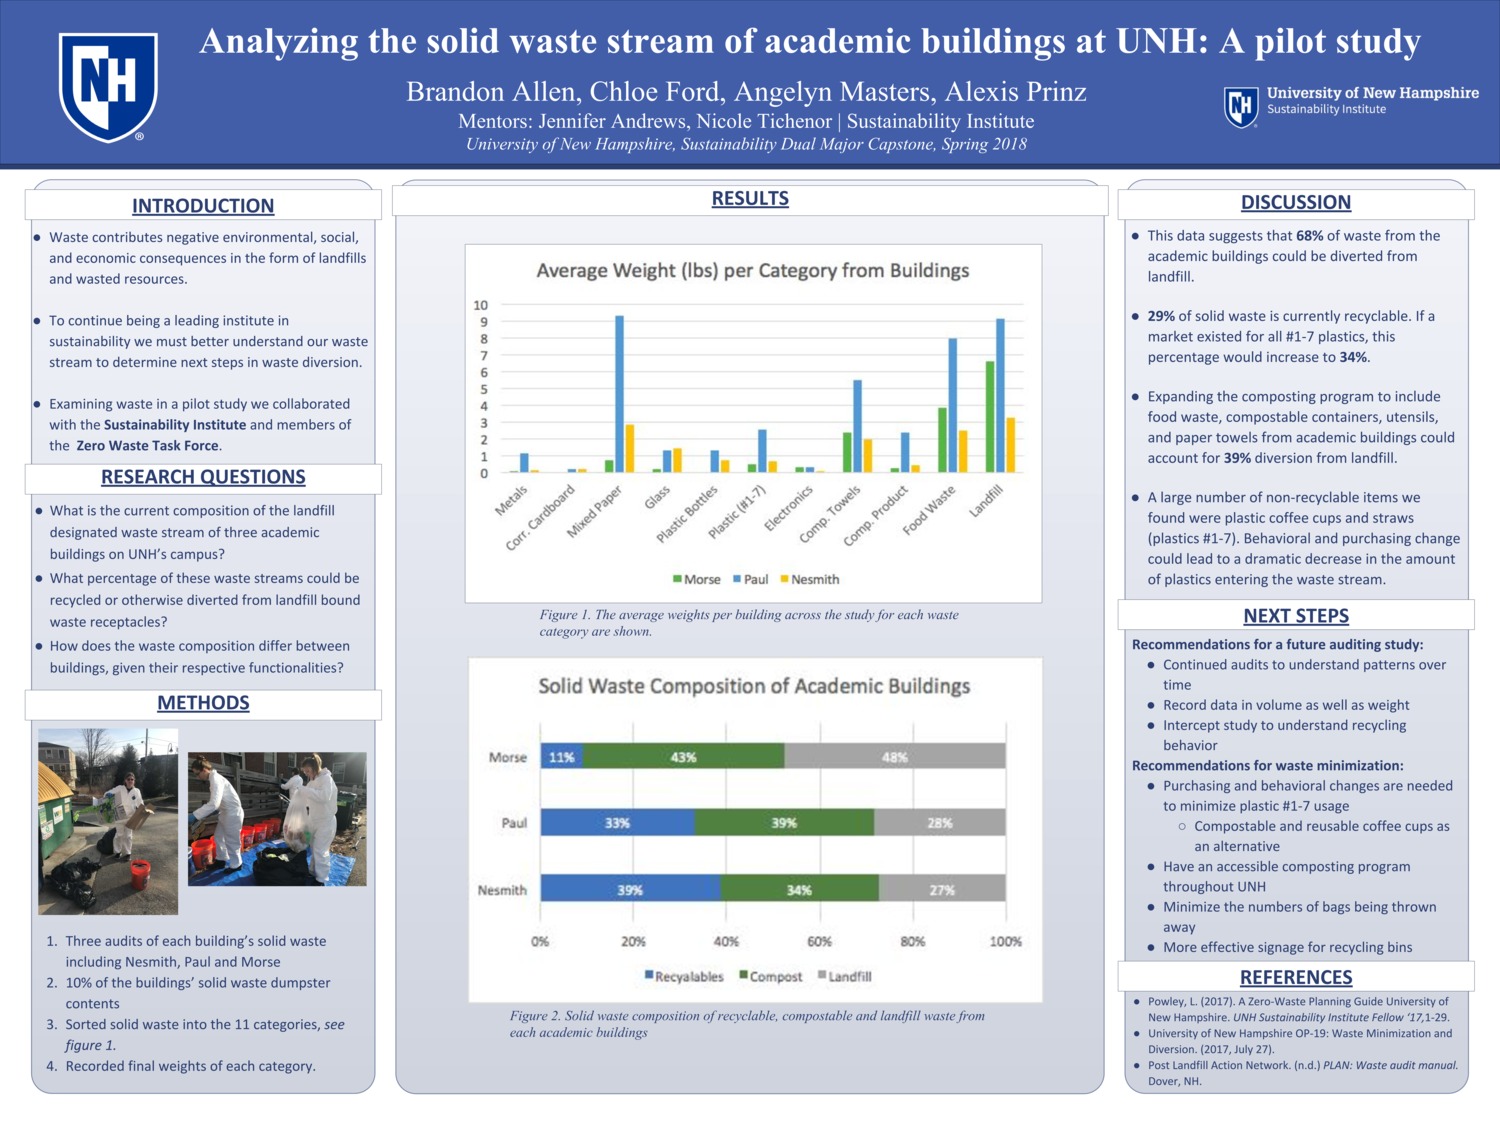 Analyzing The Solid Waste Stream Of Academic Buildings At Unh: A Pilot Study by aem2004